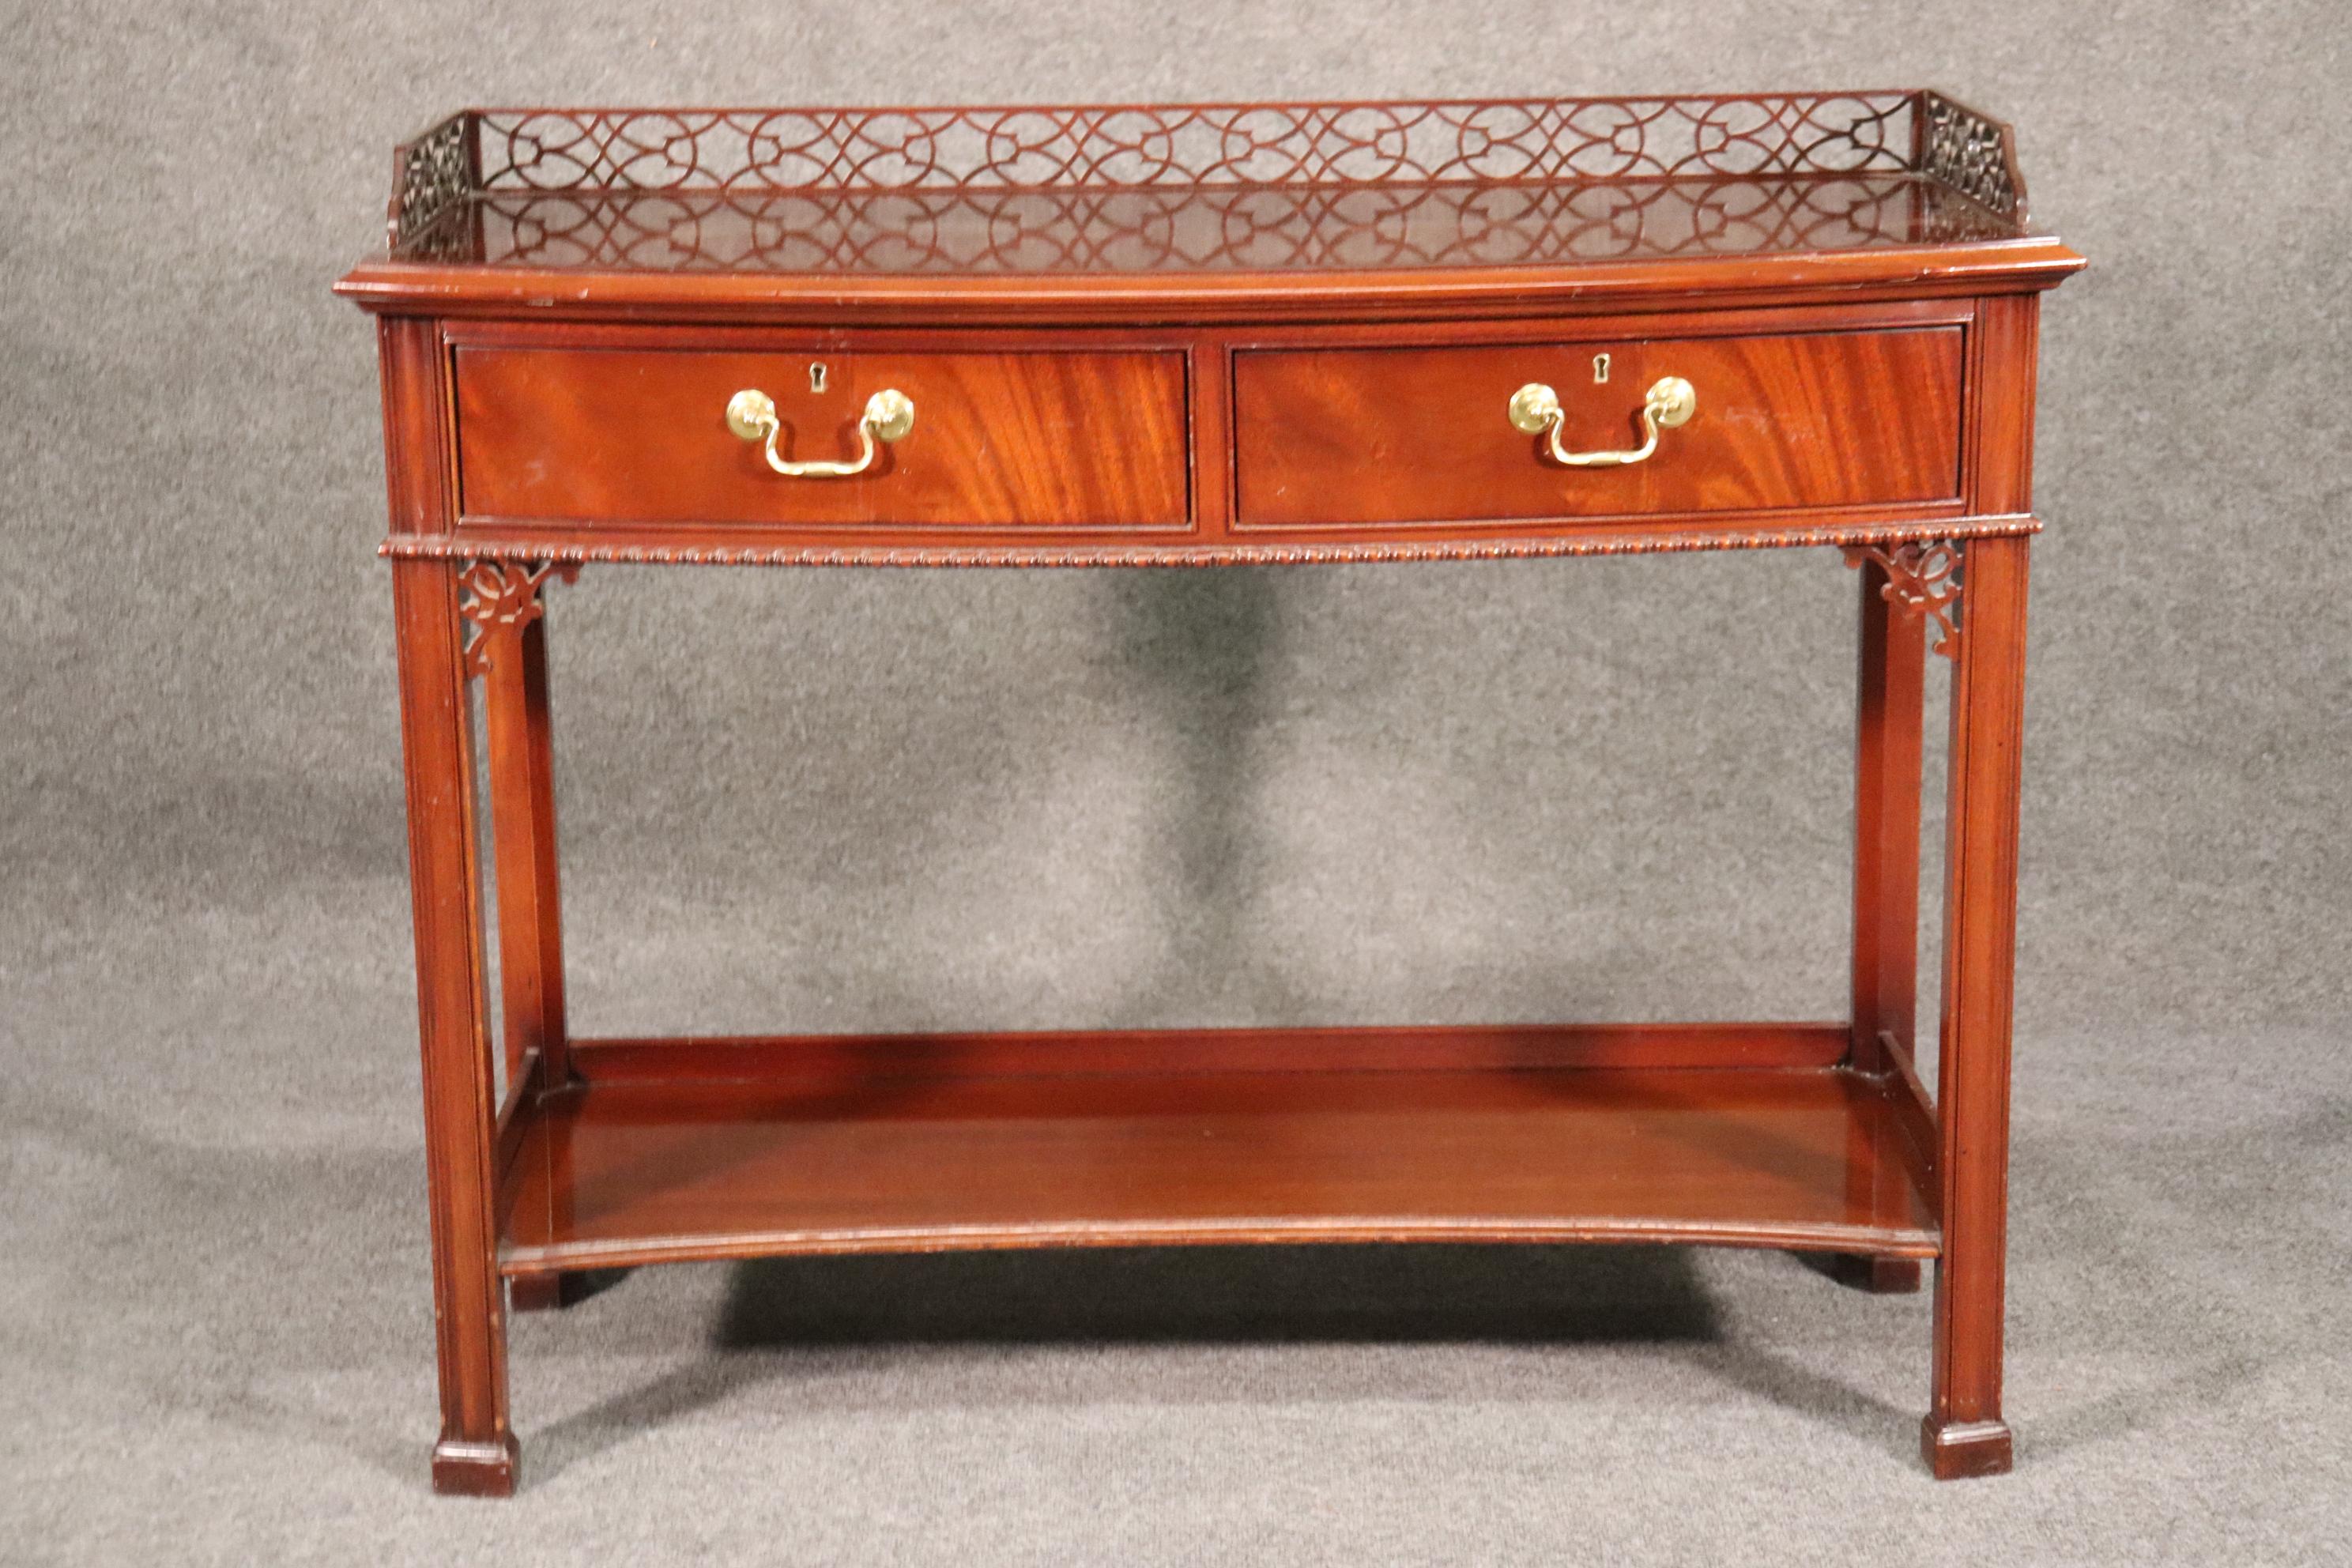 This is a beautiful Hickory chair company console table done in the Chinese Chippendale style. The table is solid mahogany and has oak secondary woods. The table has beautiful carved fretwork around the top and carved brackets too. The table